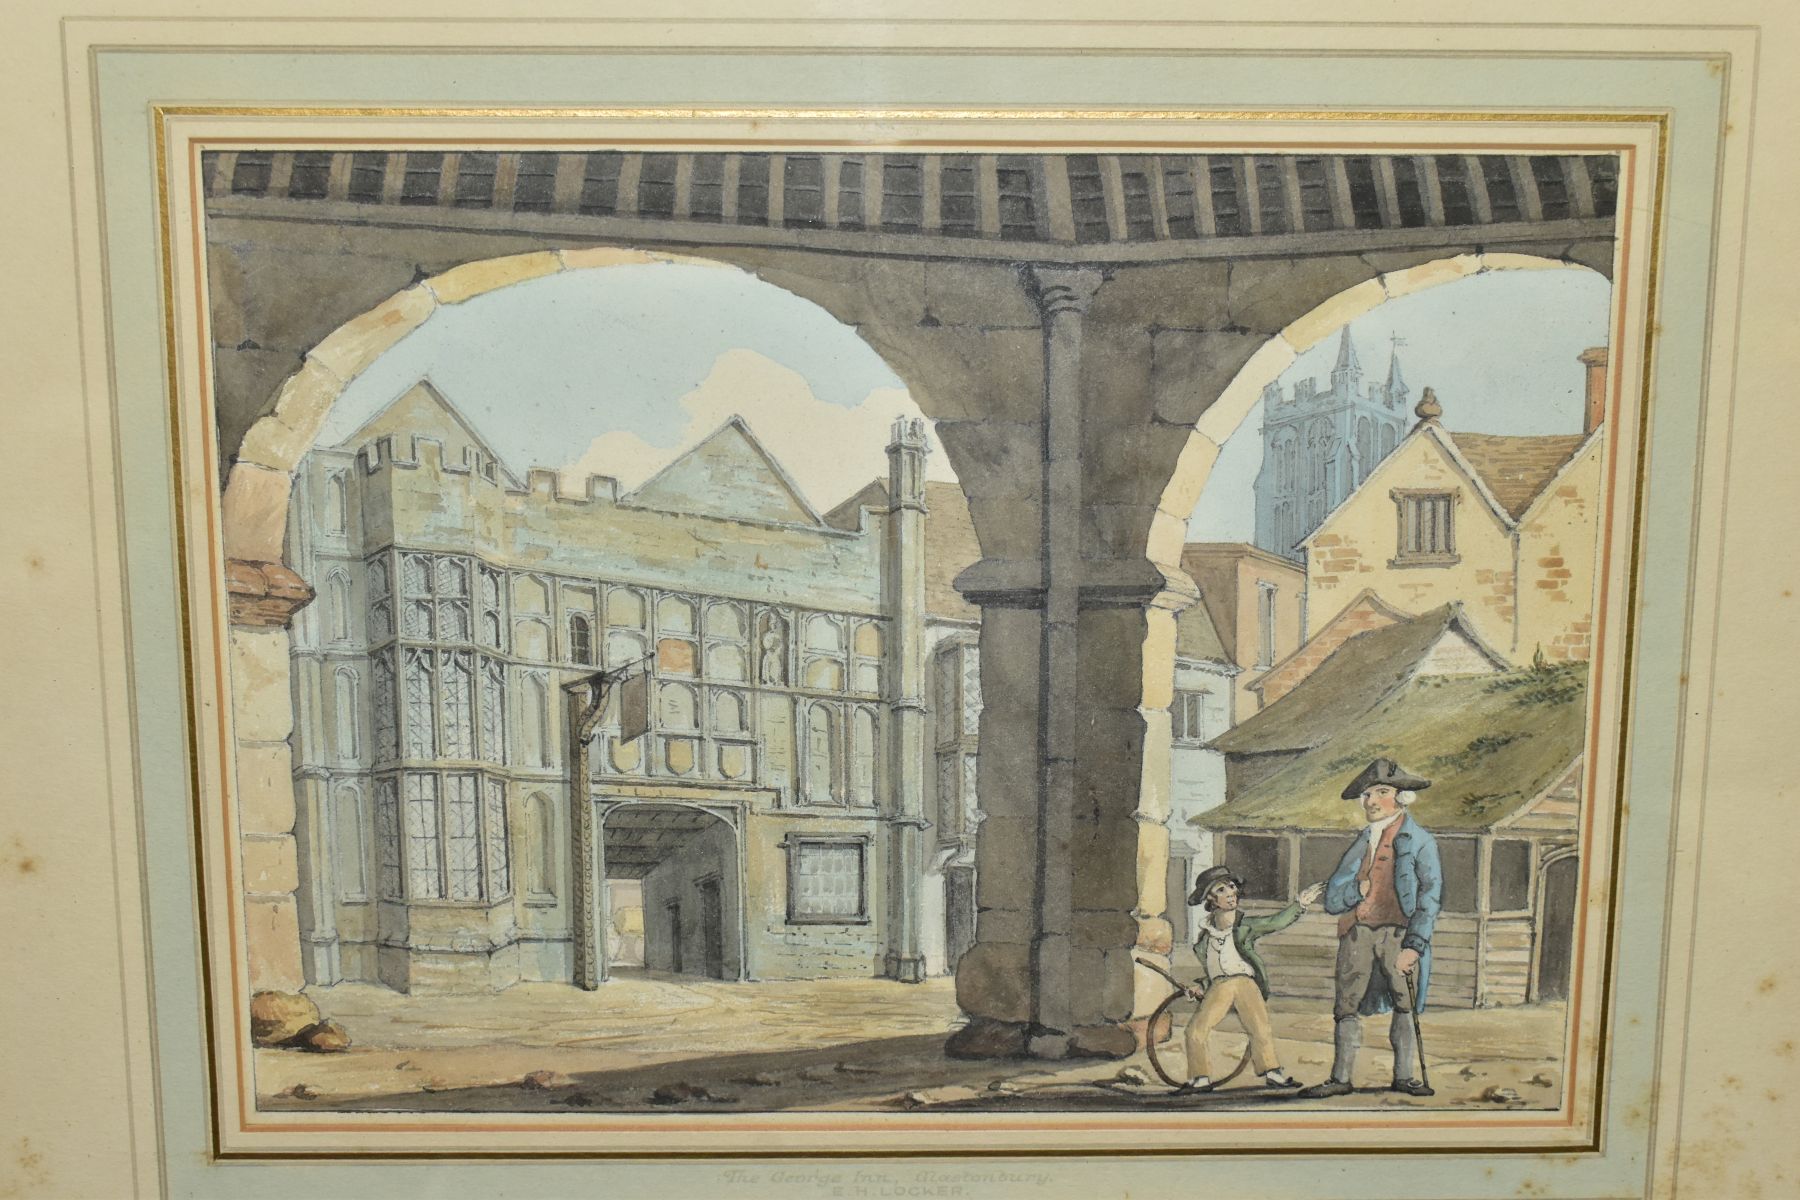 ATTRIBUTED TO EDWARD HAWKER LOCKER (1777-1848) 'THE GEORGE INN, GLASTONBURY', a view looking through - Image 2 of 4